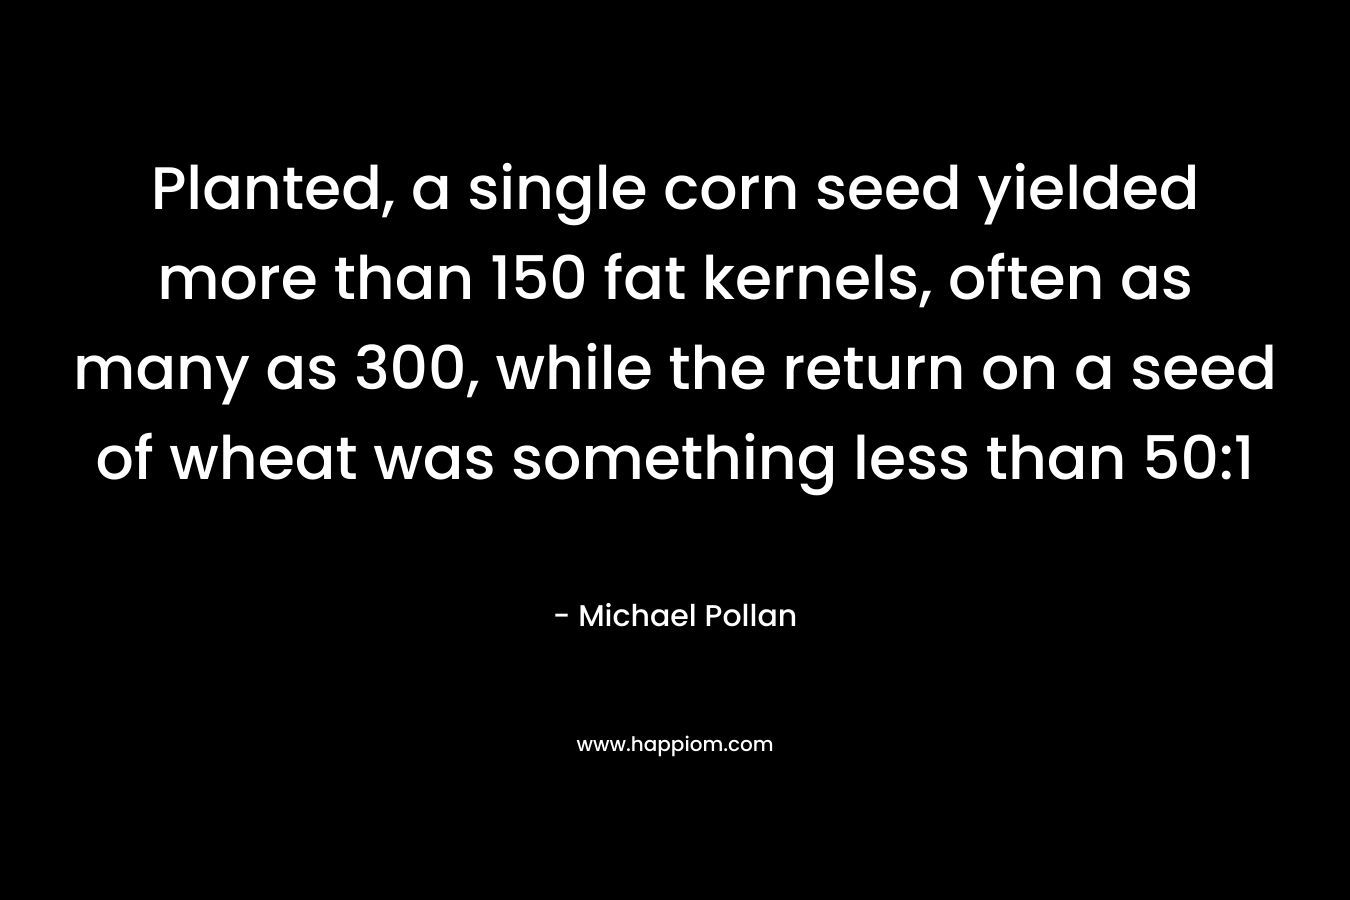 Planted, a single corn seed yielded more than 150 fat kernels, often as many as 300, while the return on a seed of wheat was something less than 50:1 – Michael Pollan